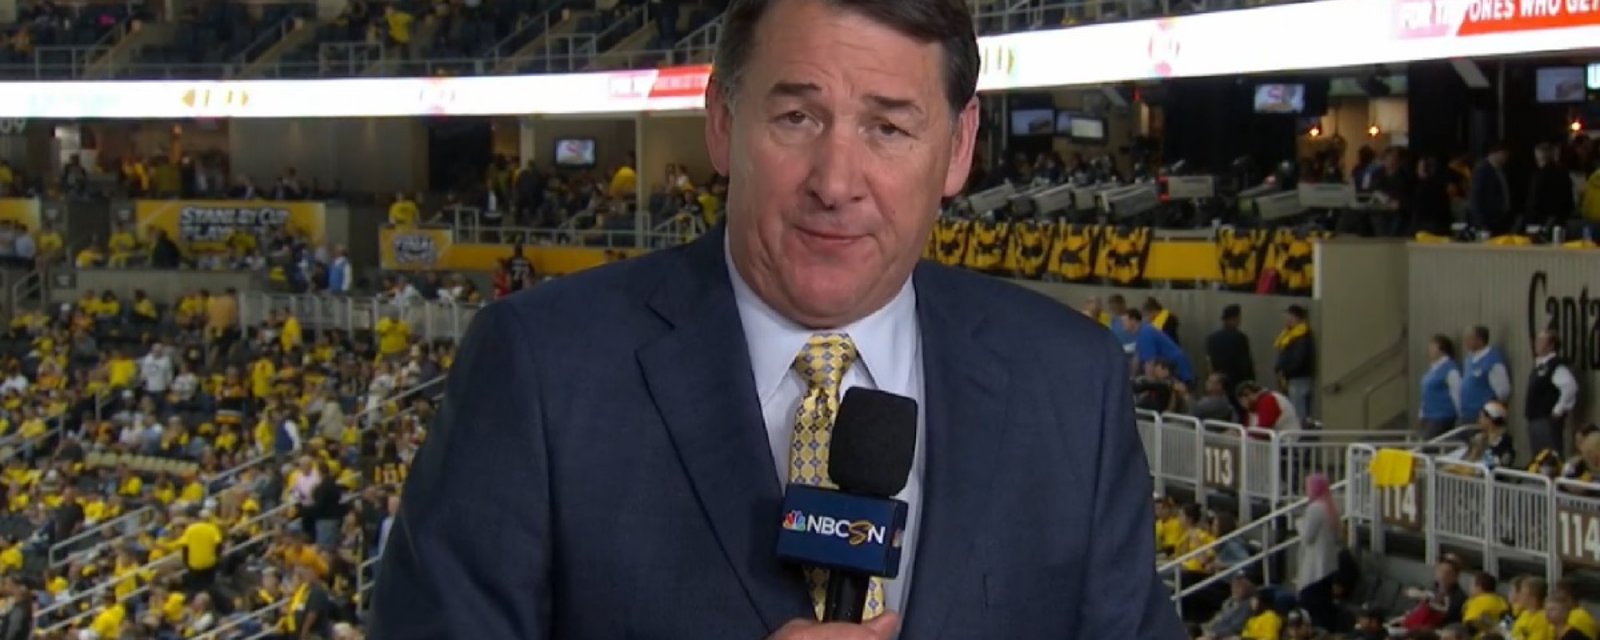 Report: NBC president wants Milbury “out of the booth asap”